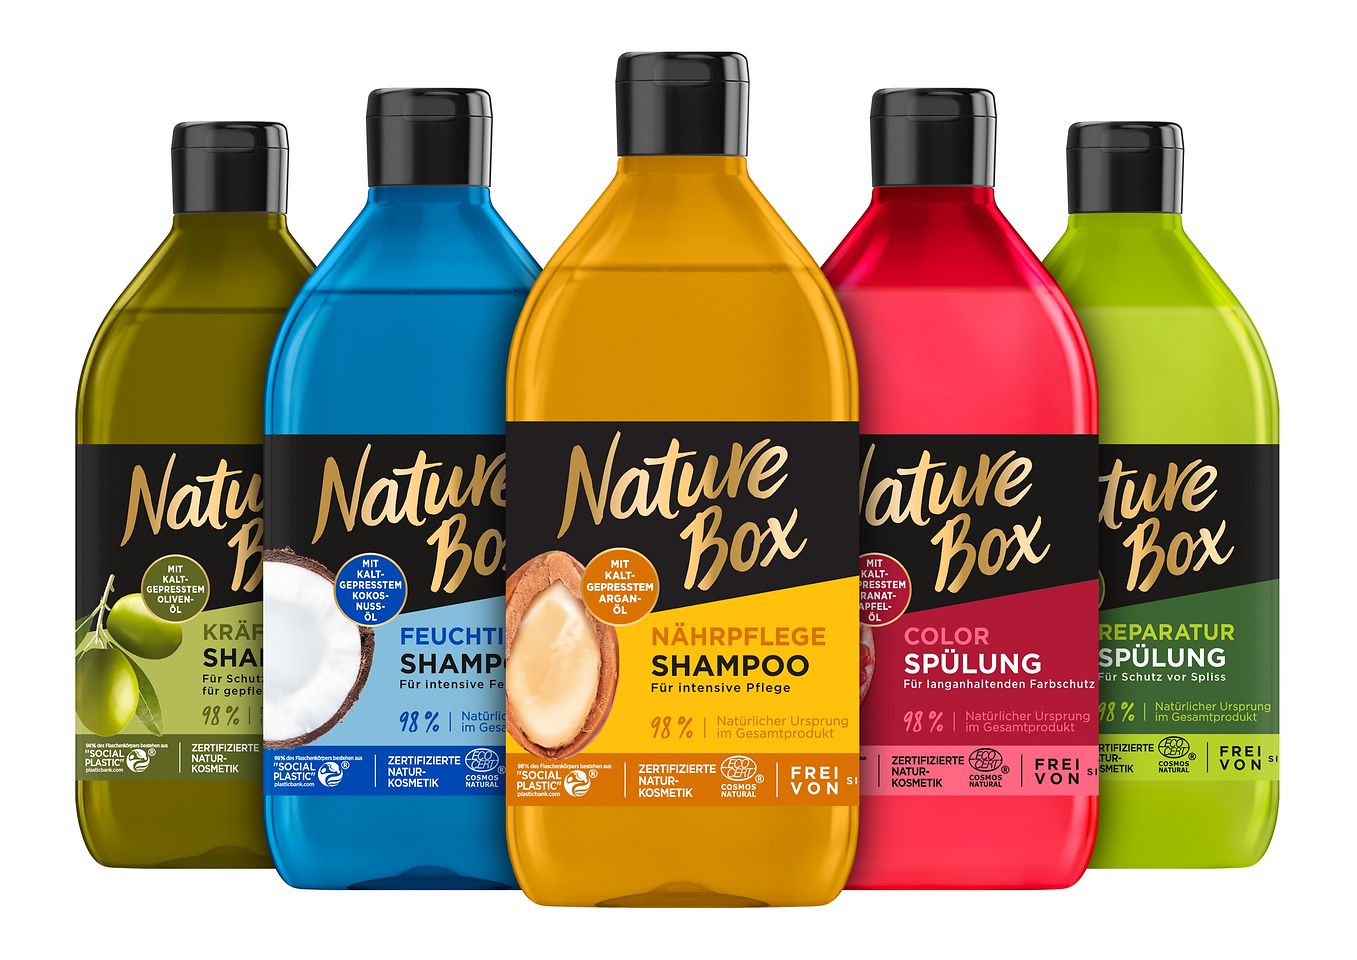 Five colorful bottles of Nature Box lined up next to each other.